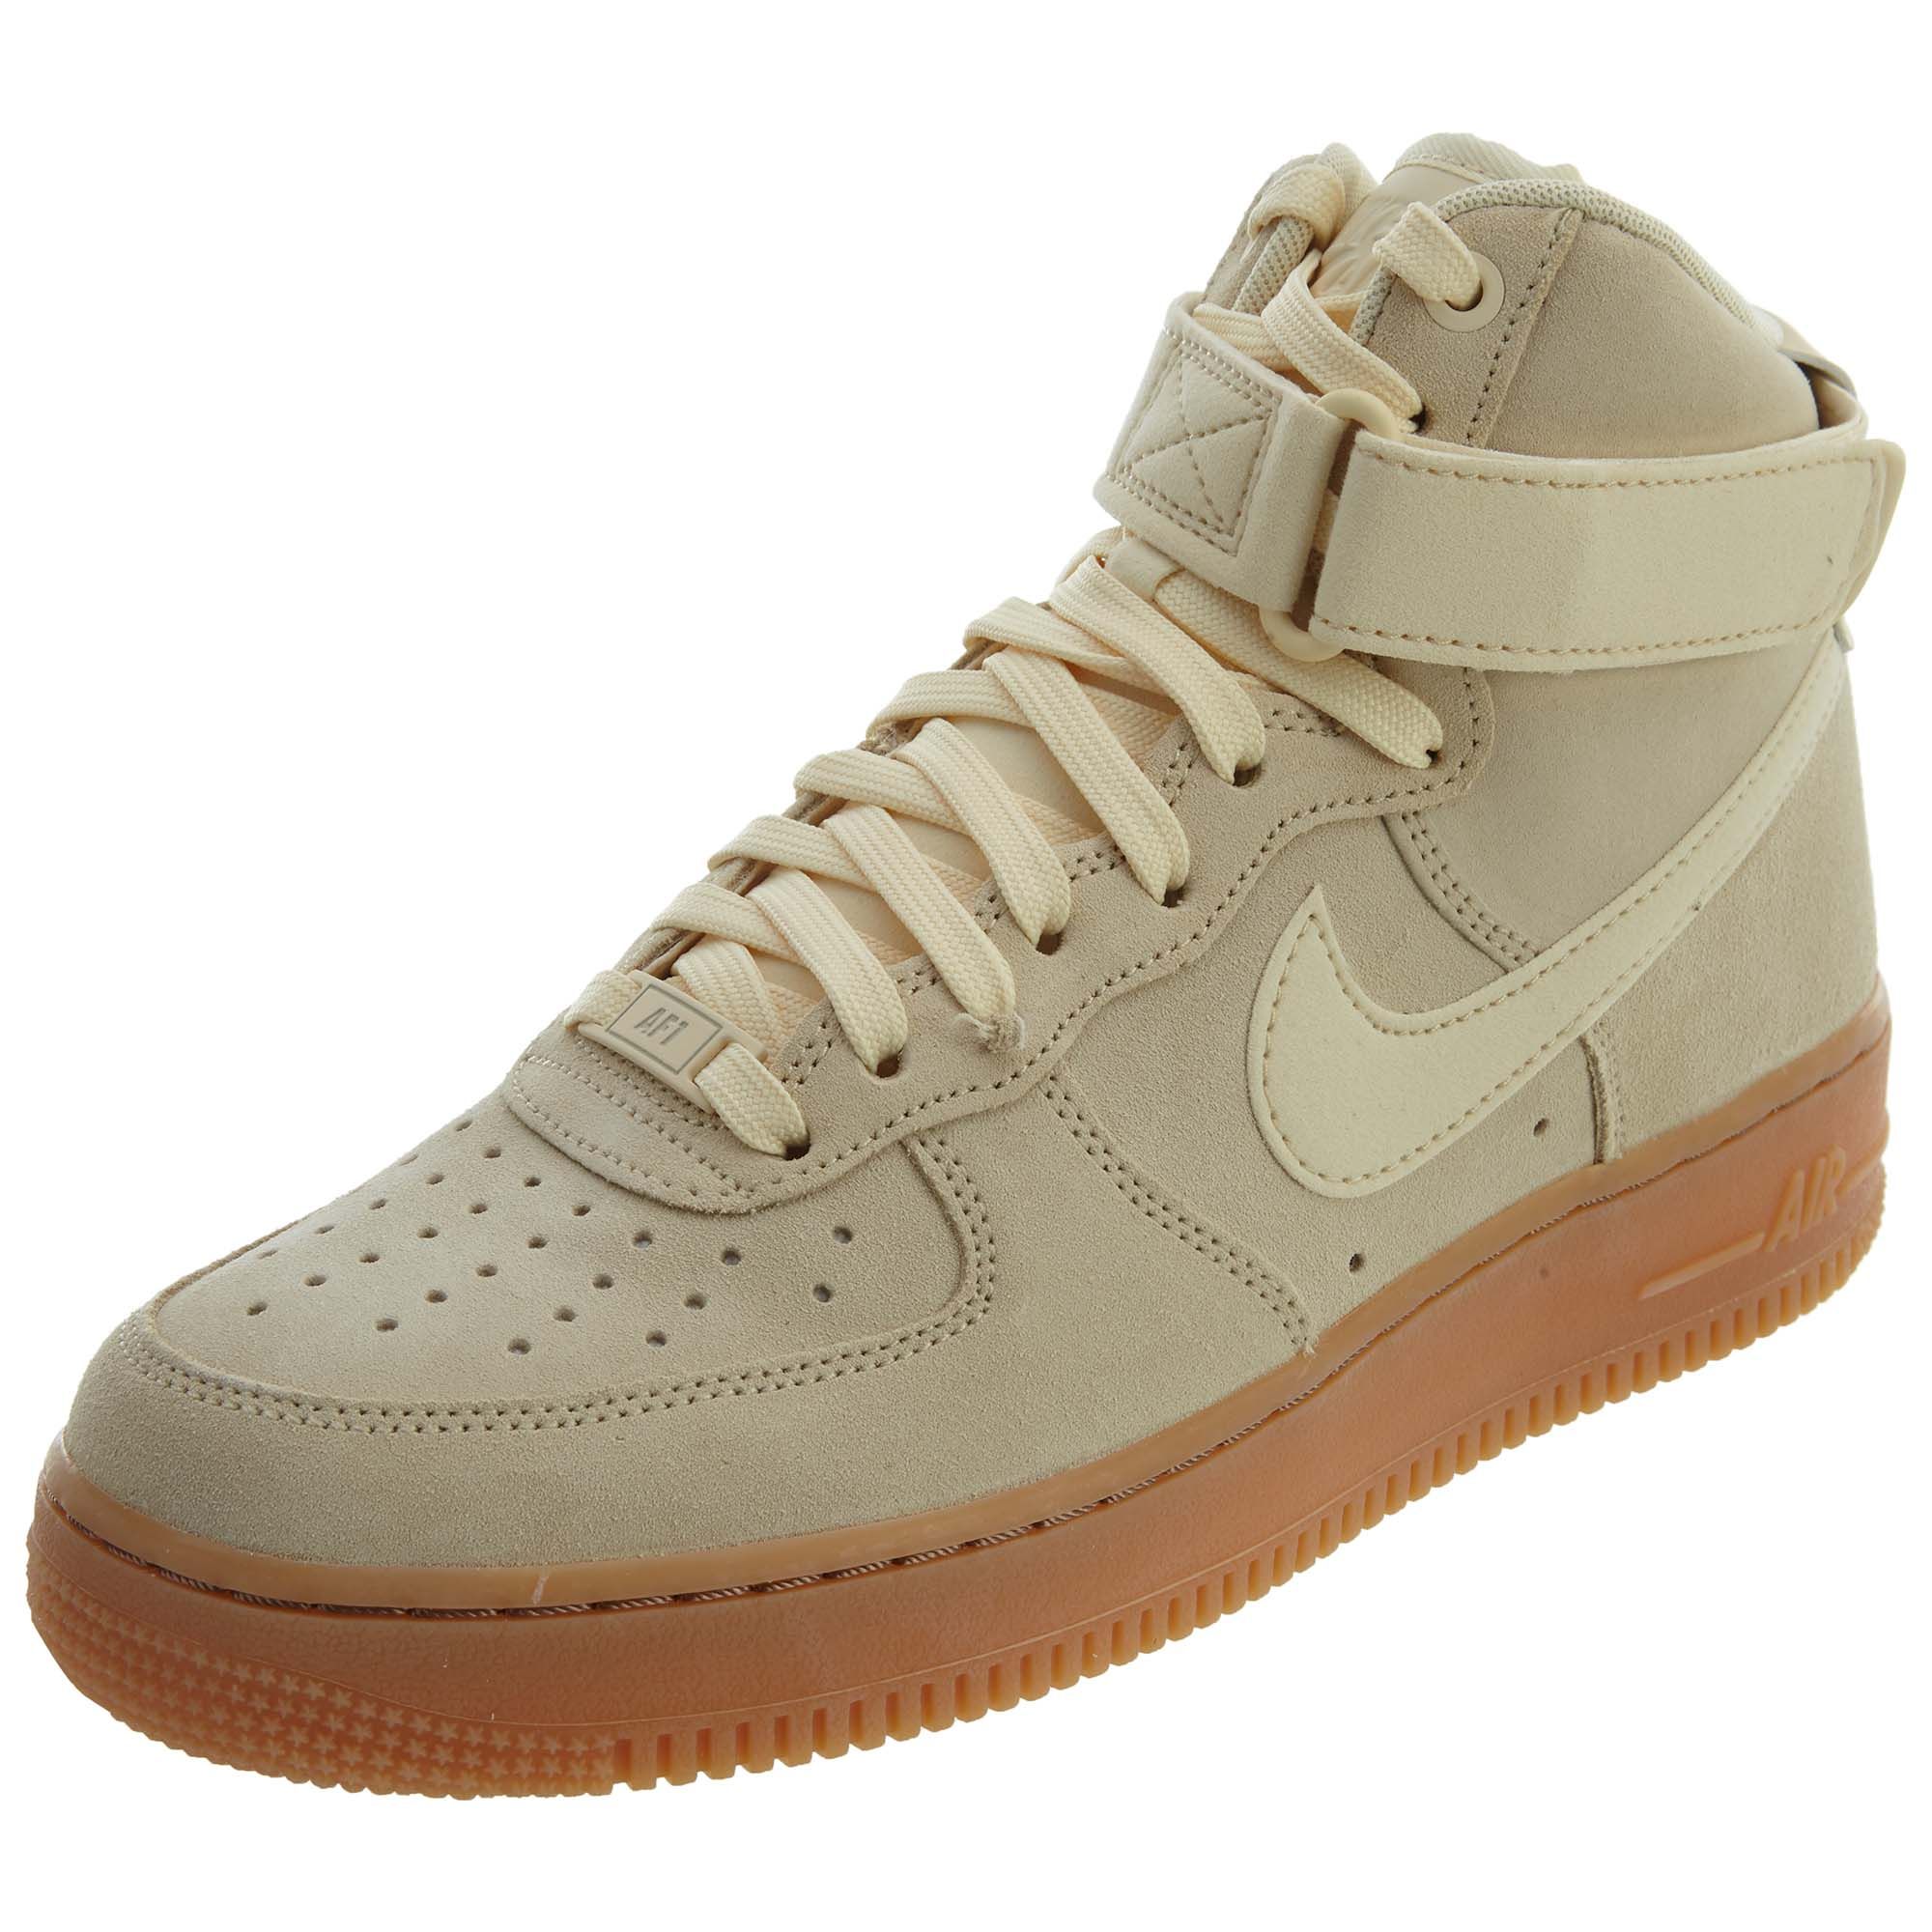 Nike Air Force 1 High '07 Lv8 Suede 